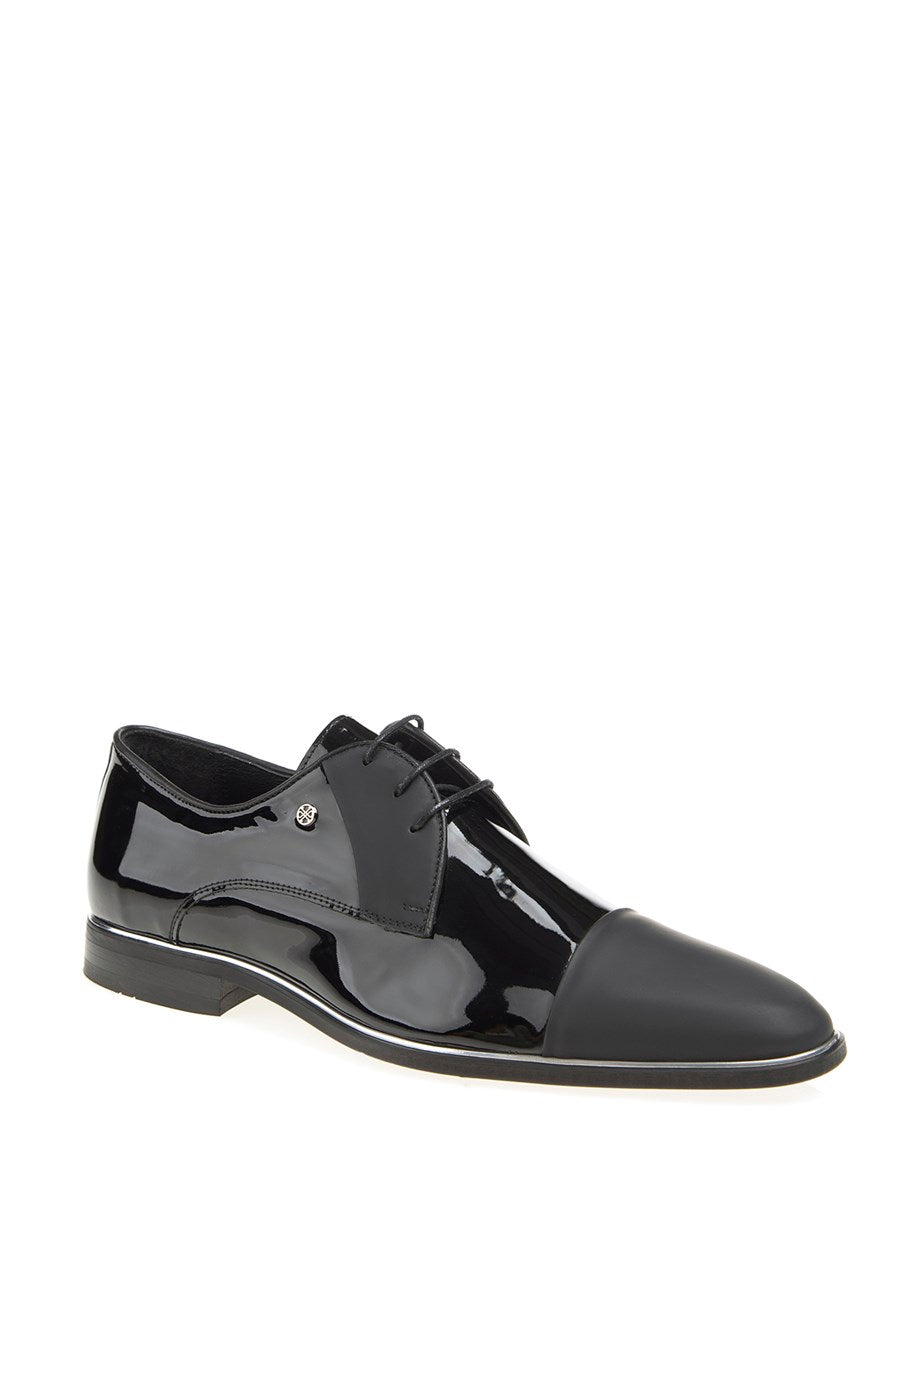 Neolite Sole Genuine Patent Leather Classic - MENSTYLEWITH